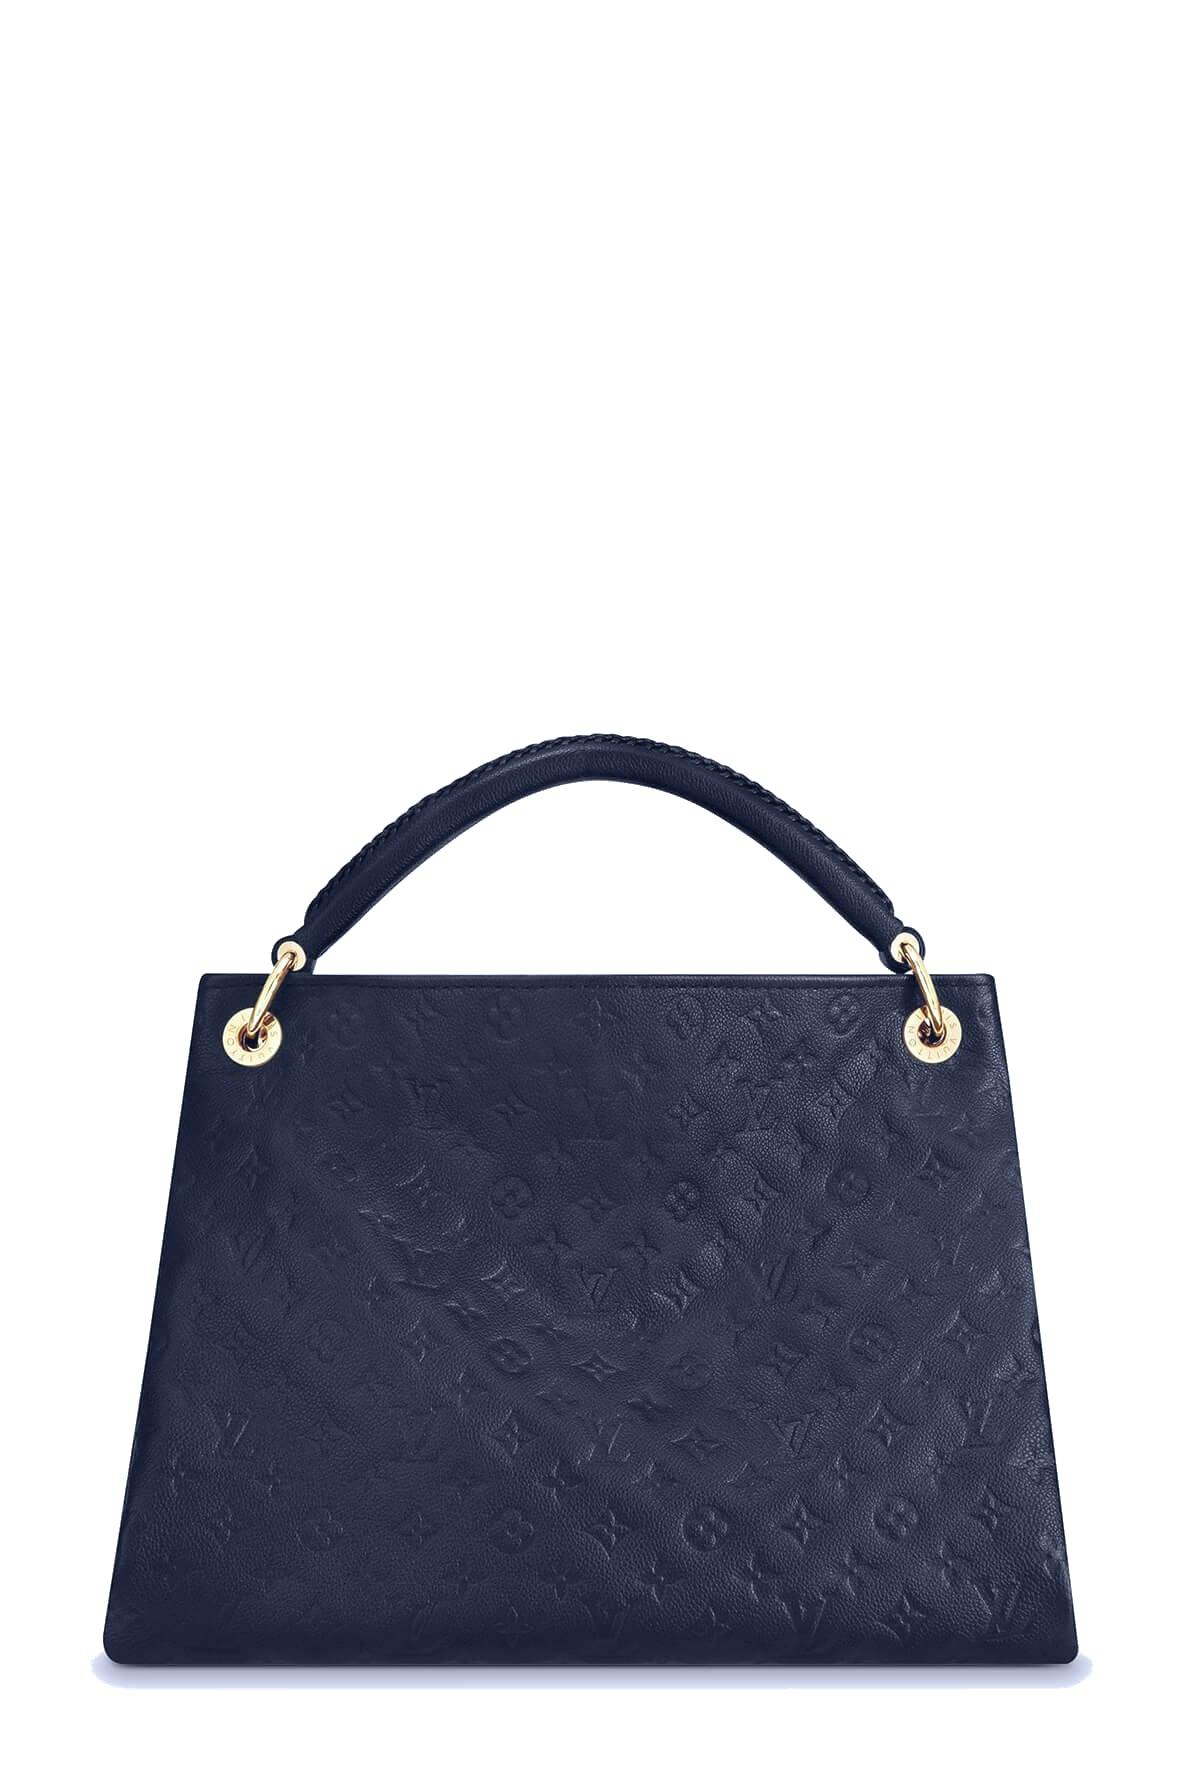 Buy Empreinte Bags  Louis Vuitton from Second Edit by Style Theory